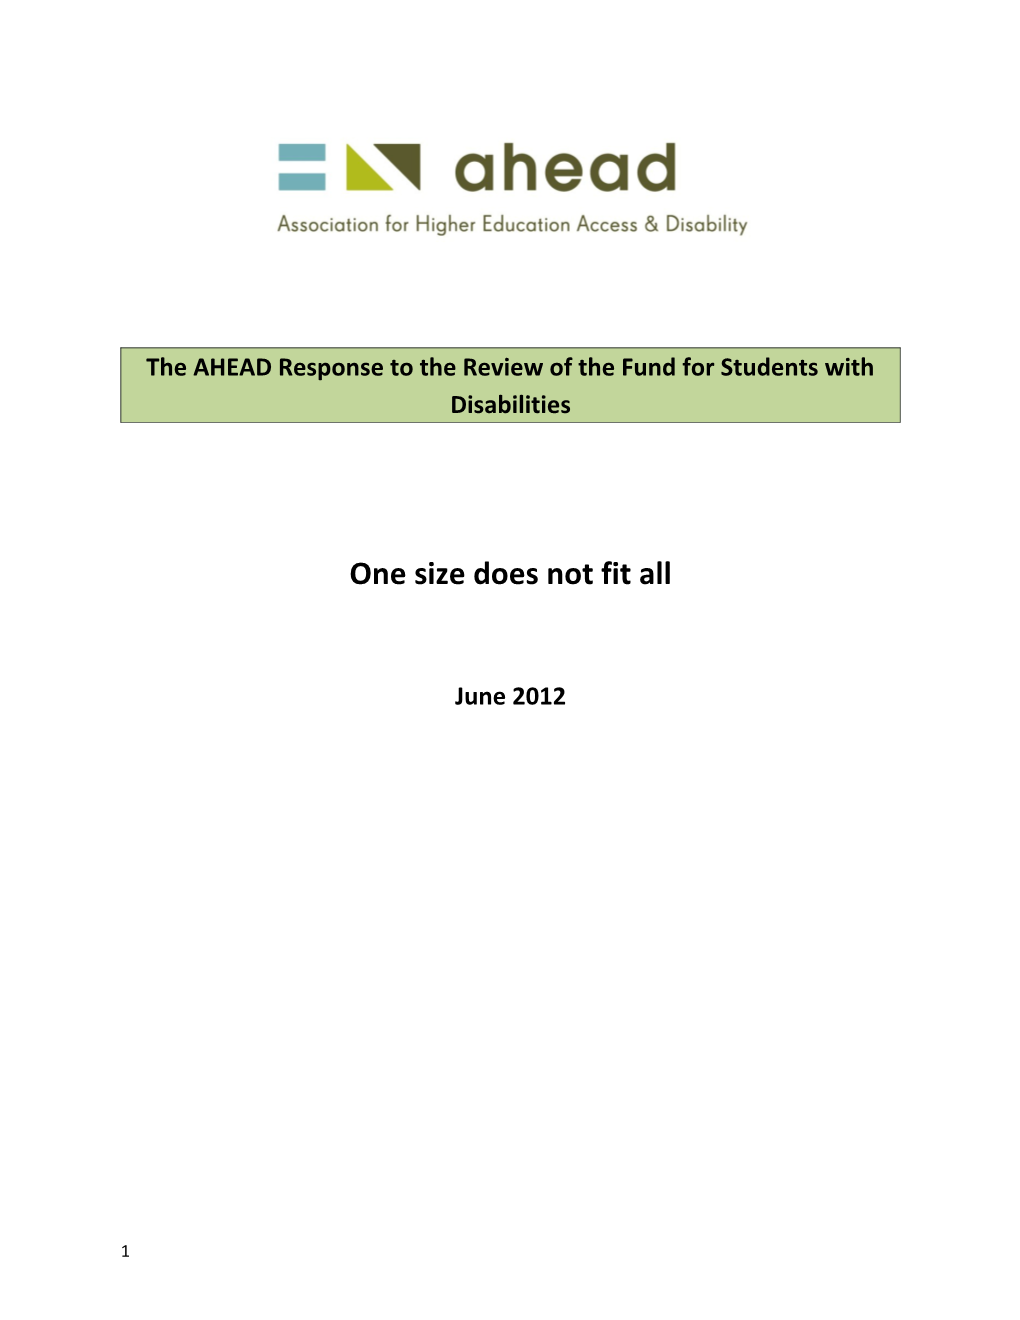 The AHEAD Response to the Review of the Fund for Students with Disabilities